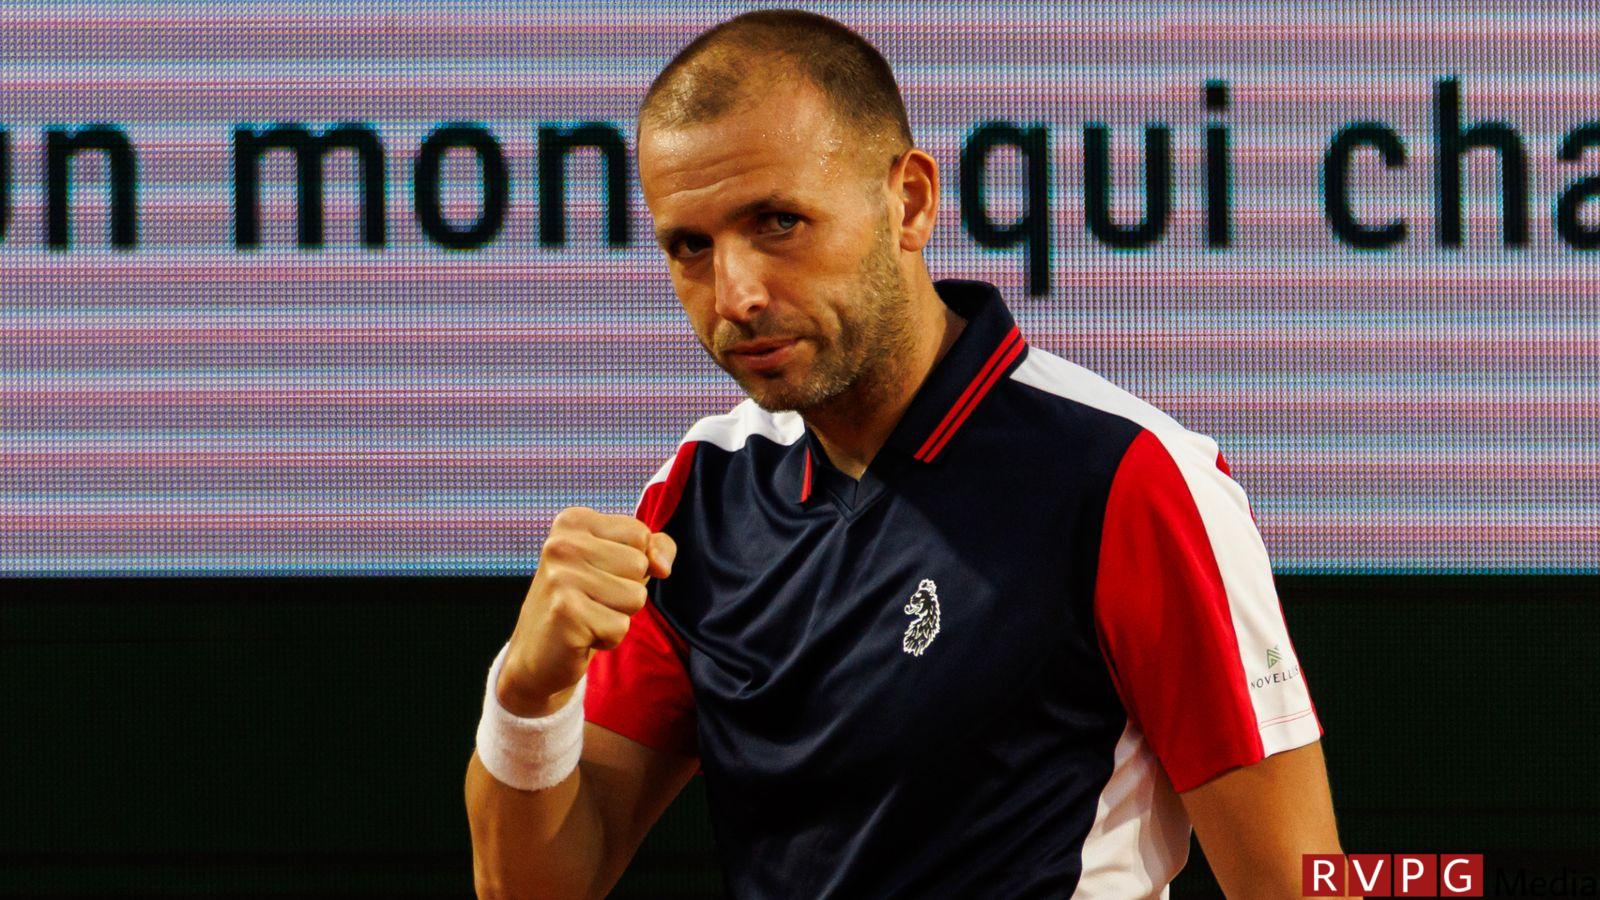 Dan Evans of Great Britain celebrates during his match against Holger Rune of Denmark in the first round at Roland Garros on May 28, 2024 in Paris, France. (Photo by Frey/TPN/Getty Images)